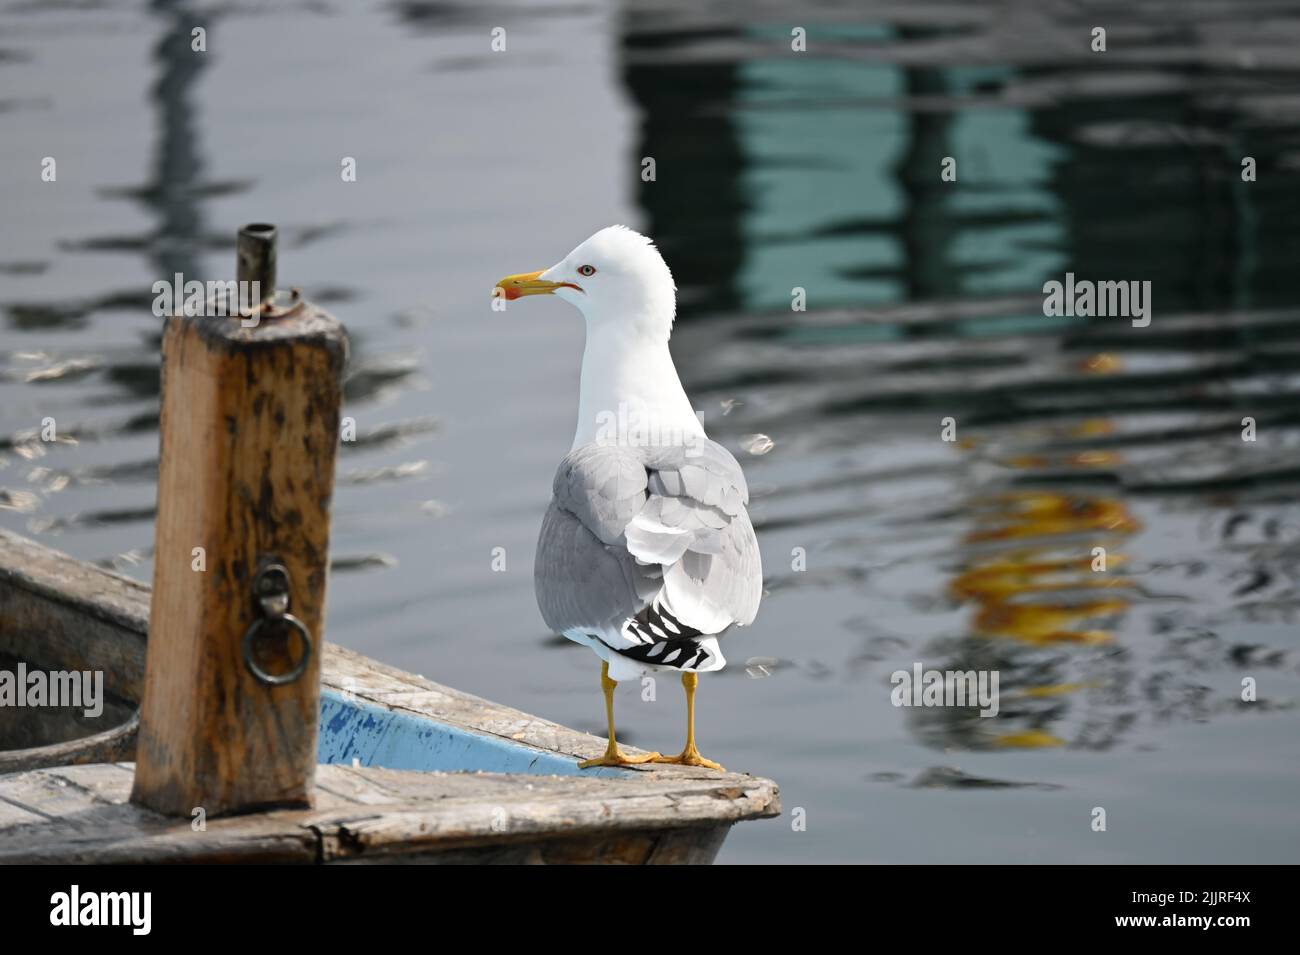 A close-up shot of a seagull on a wooden surface with a water background Stock Photo